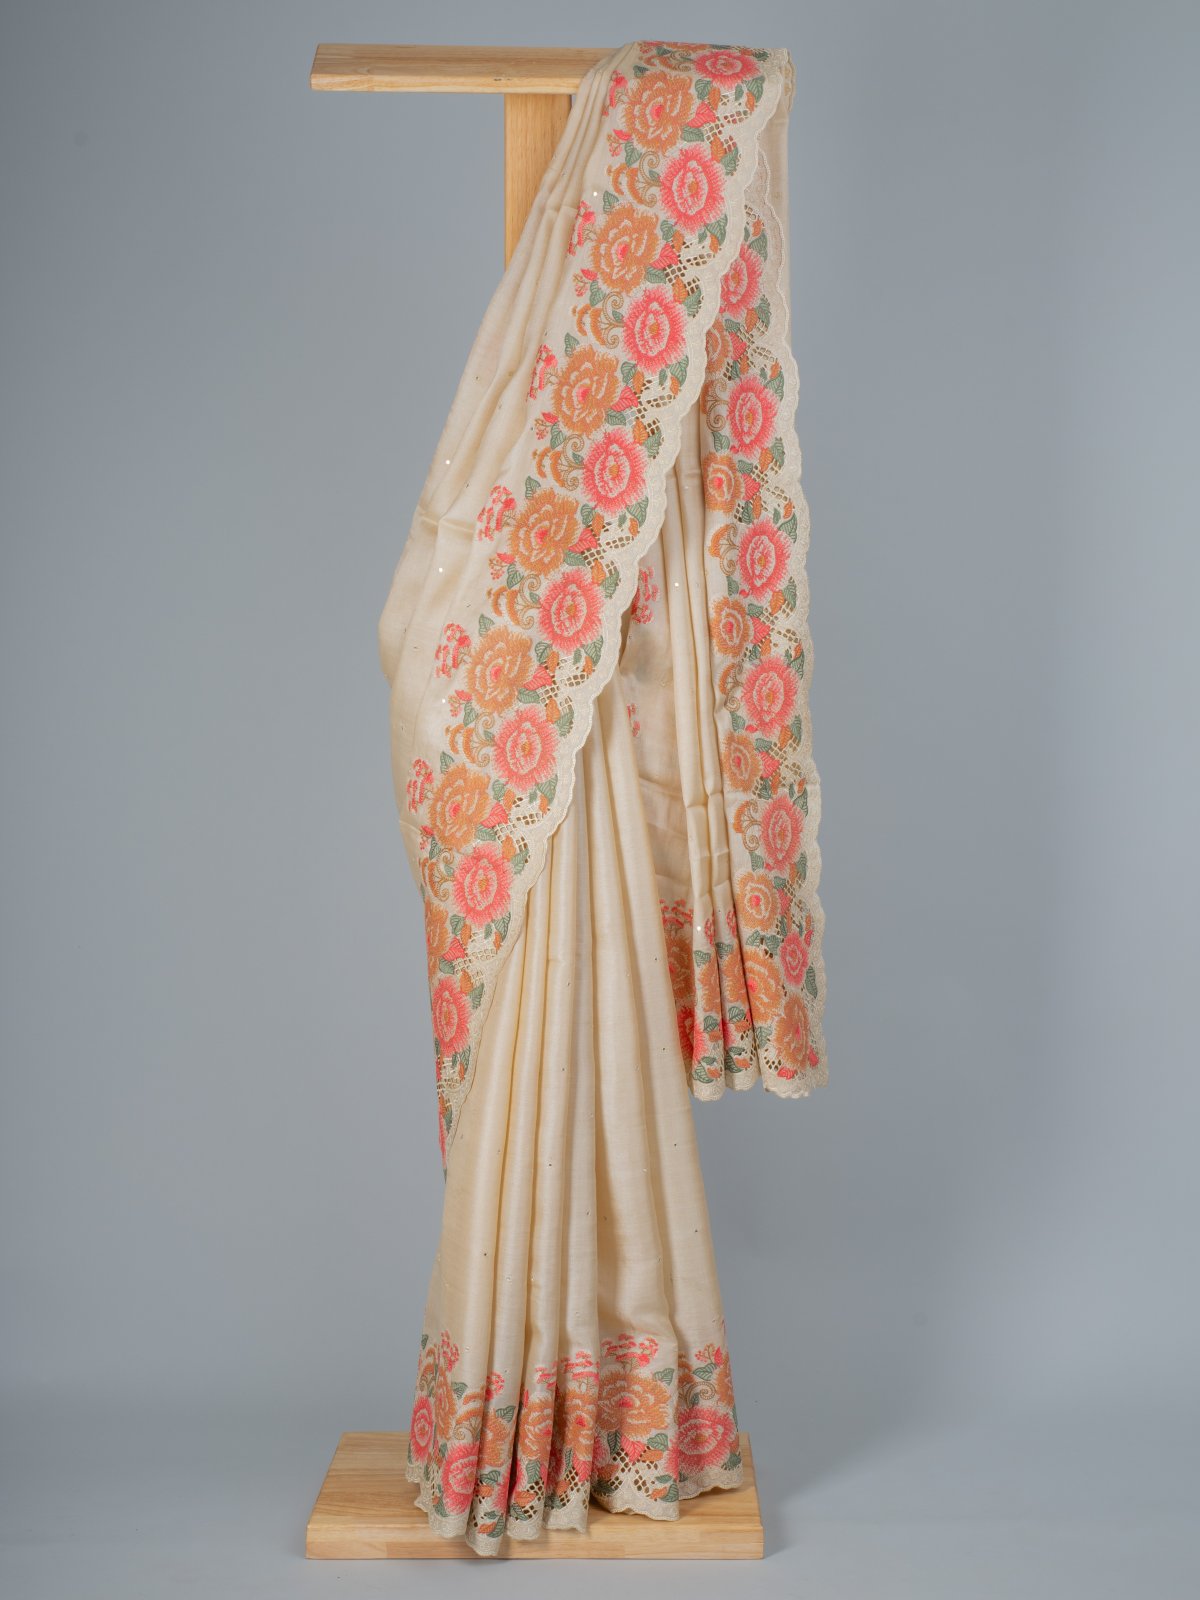 Off-White Tussar Silk Saree With Cutwork Embroidery